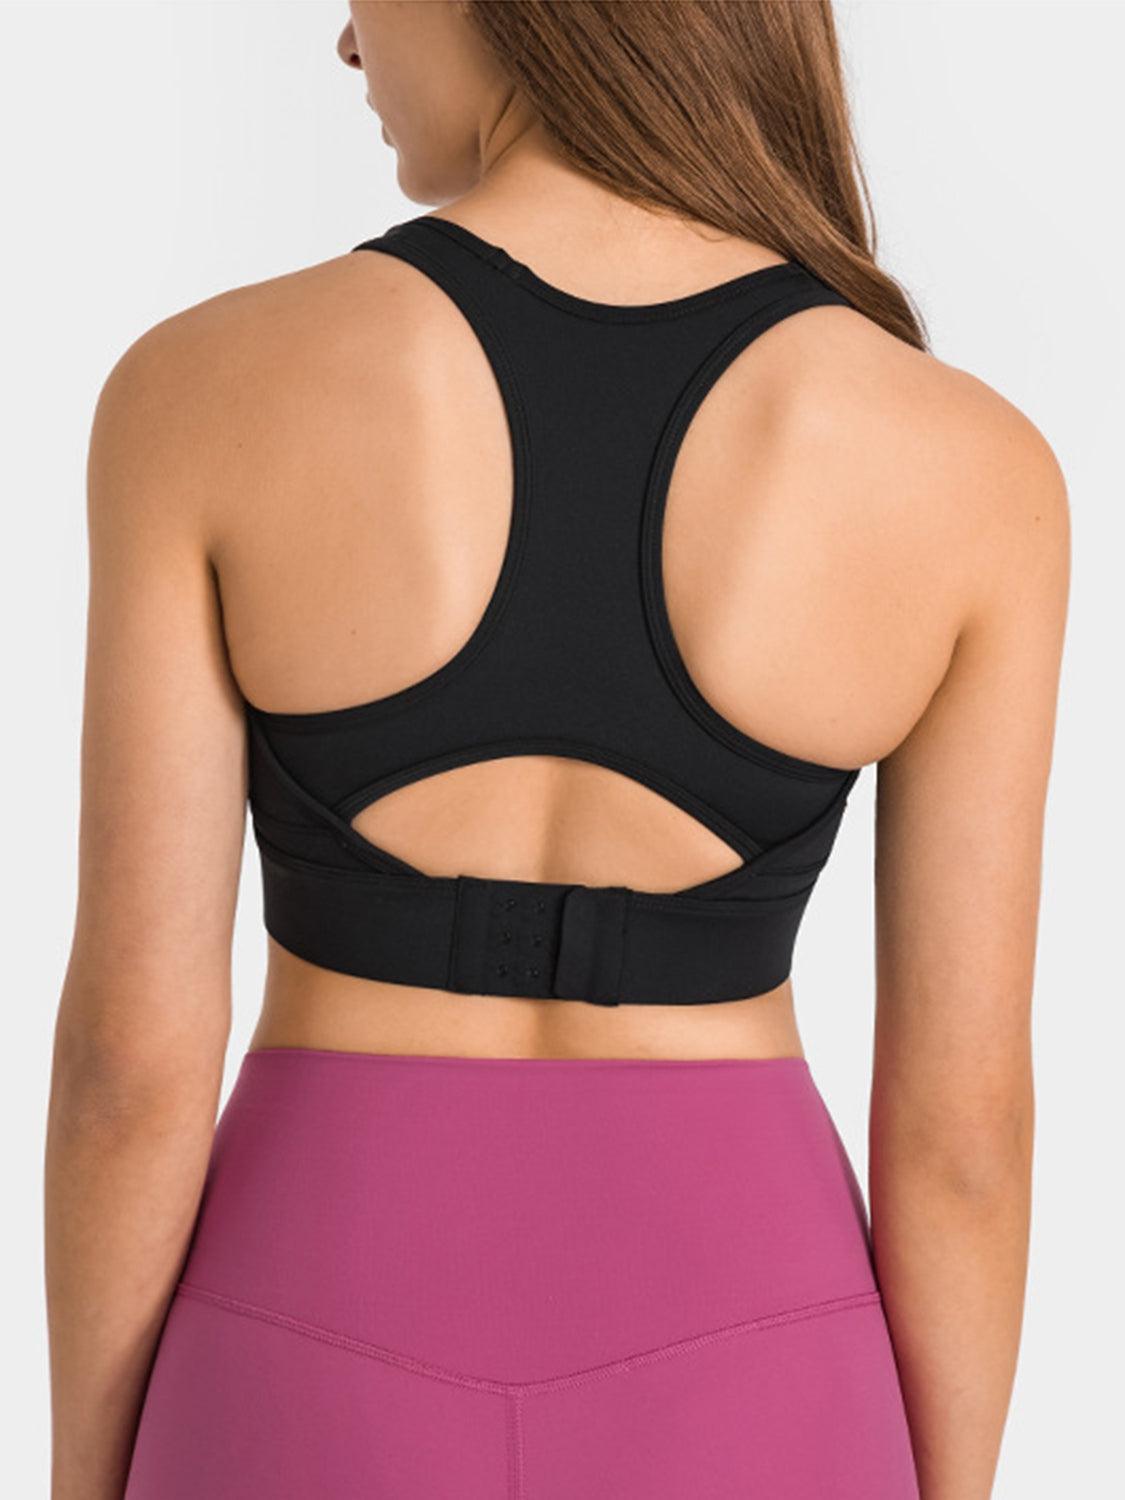 the back of a woman wearing a black sports bra top